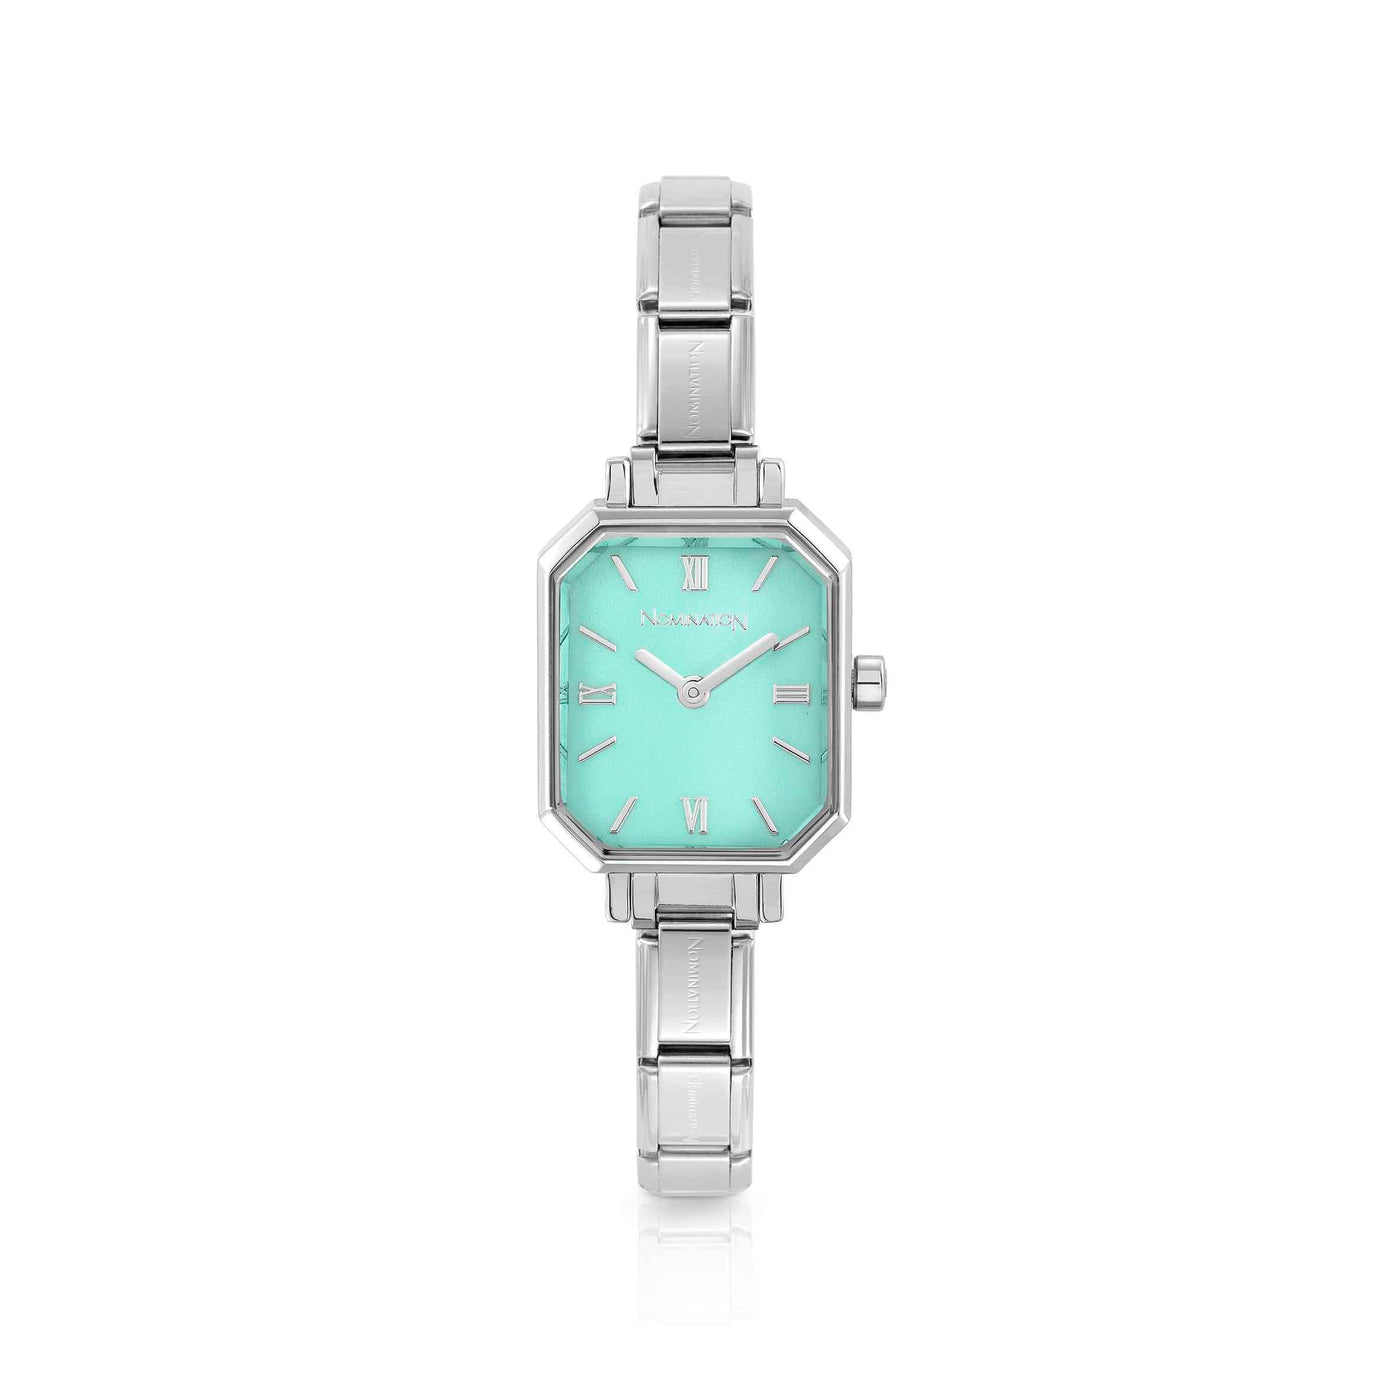 Nomination Paris Turquoise Green Watch with Stones - Rococo Jewellery